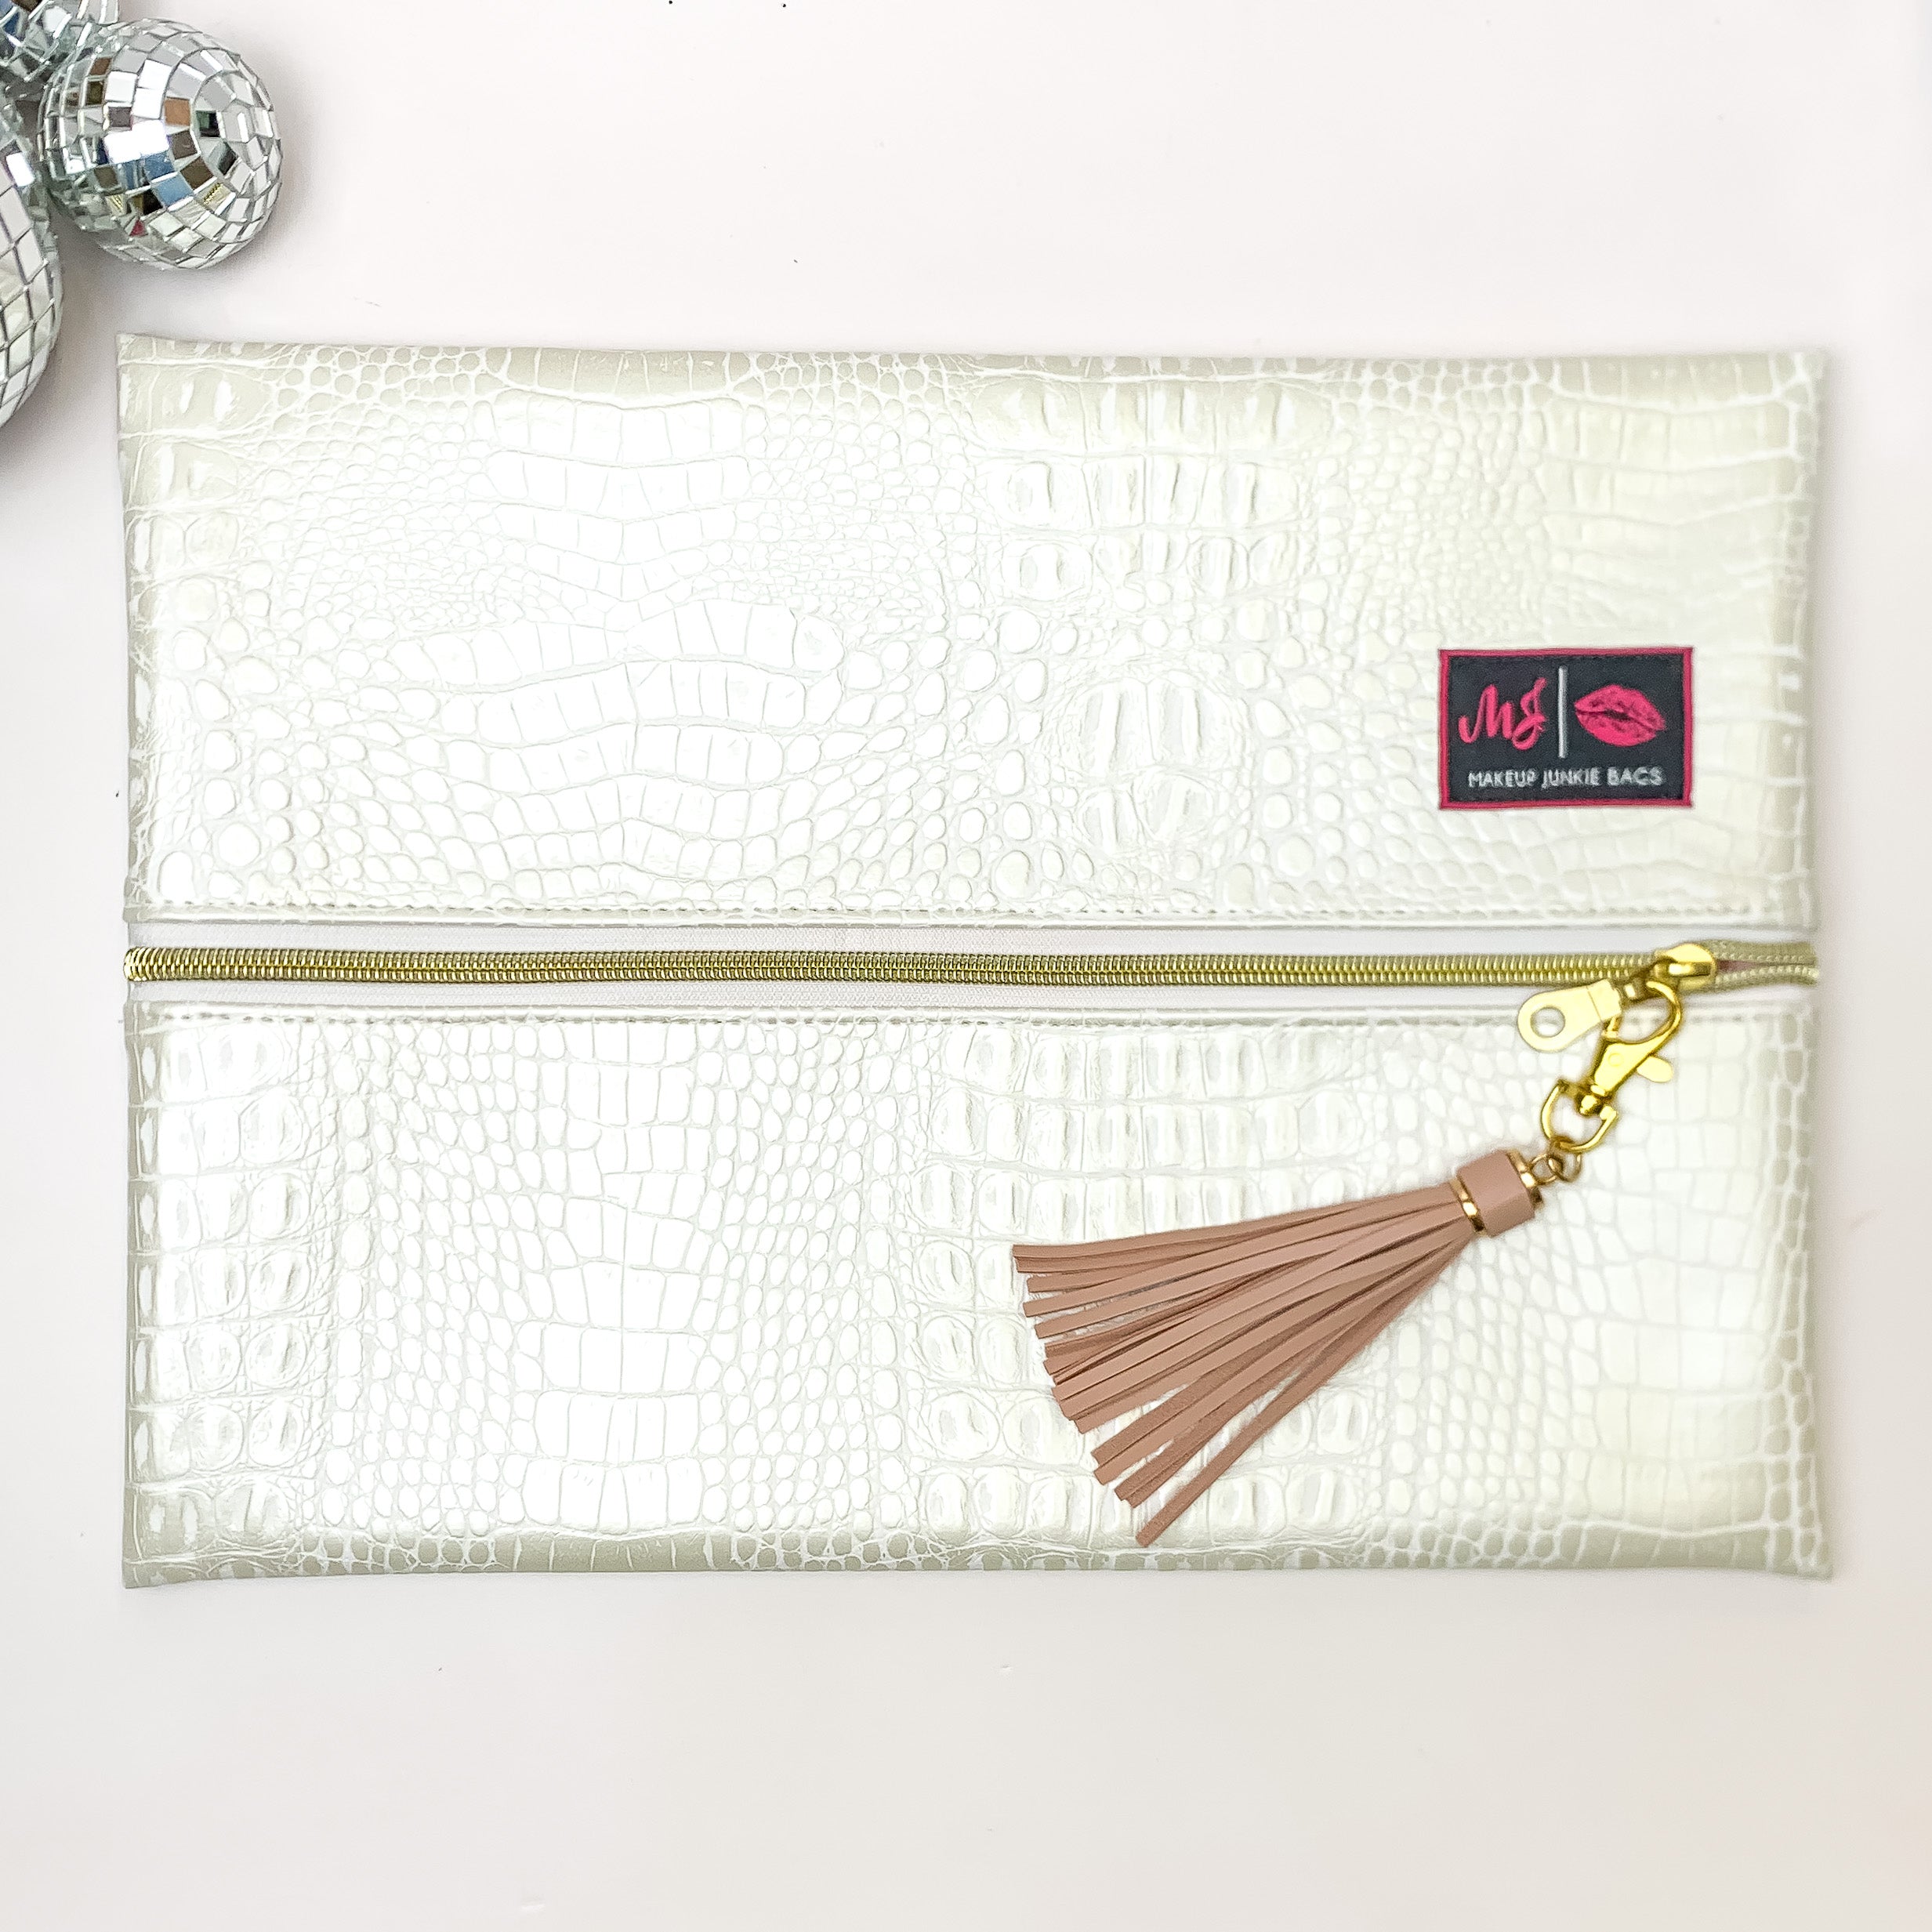 Makeup Junkie | Large Shade of Pearl Lay Flat Bag in Pearl White Croc Print - Giddy Up Glamour Boutique